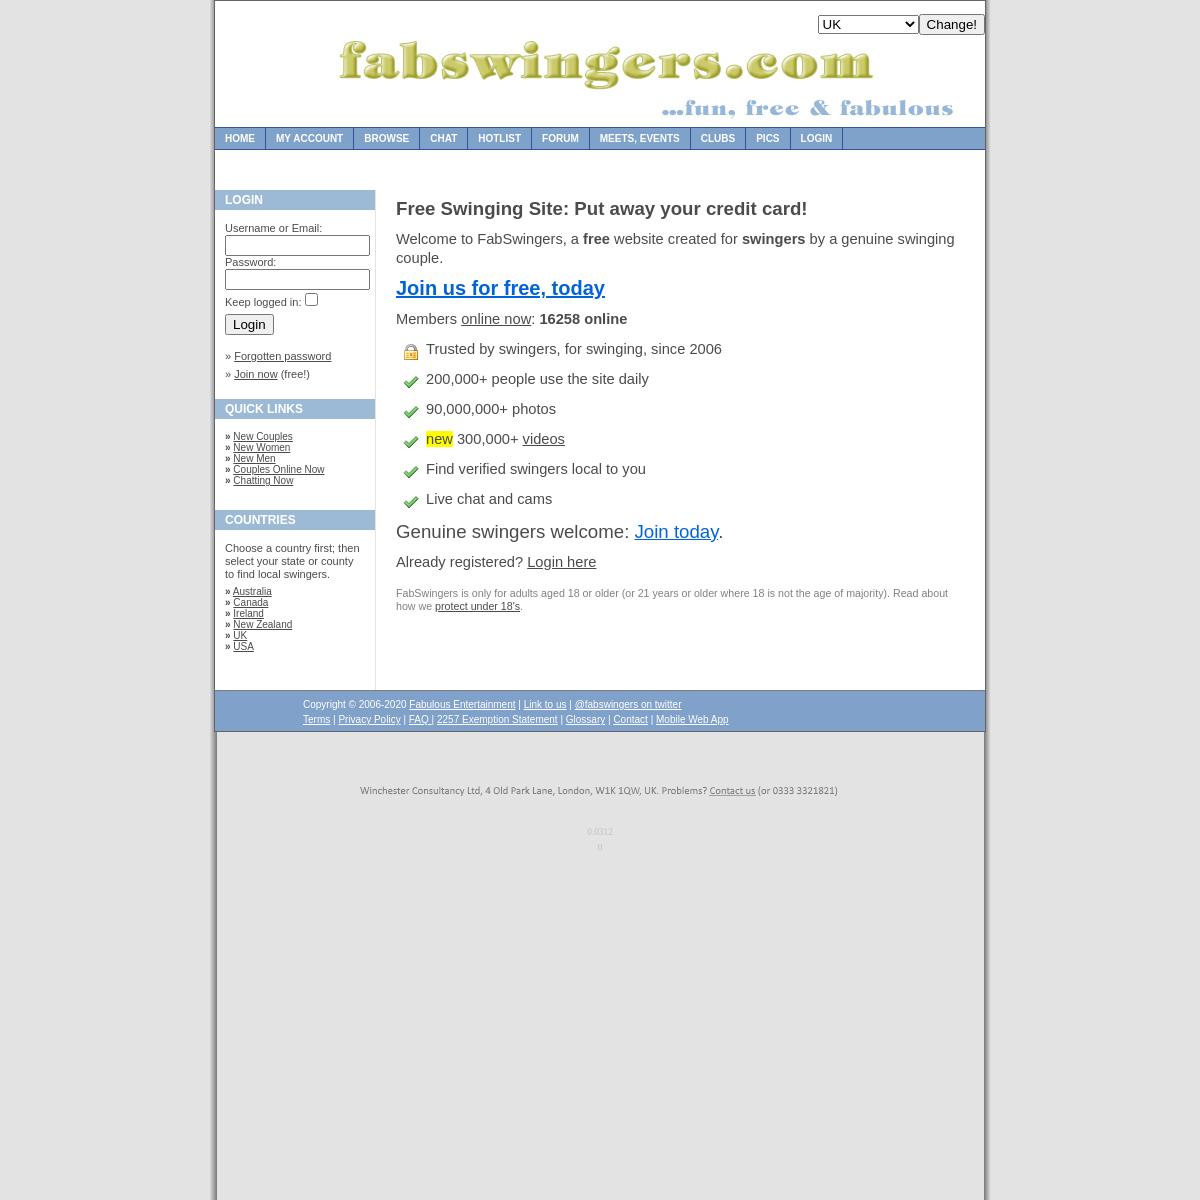 A complete backup of www.fabswingers.com